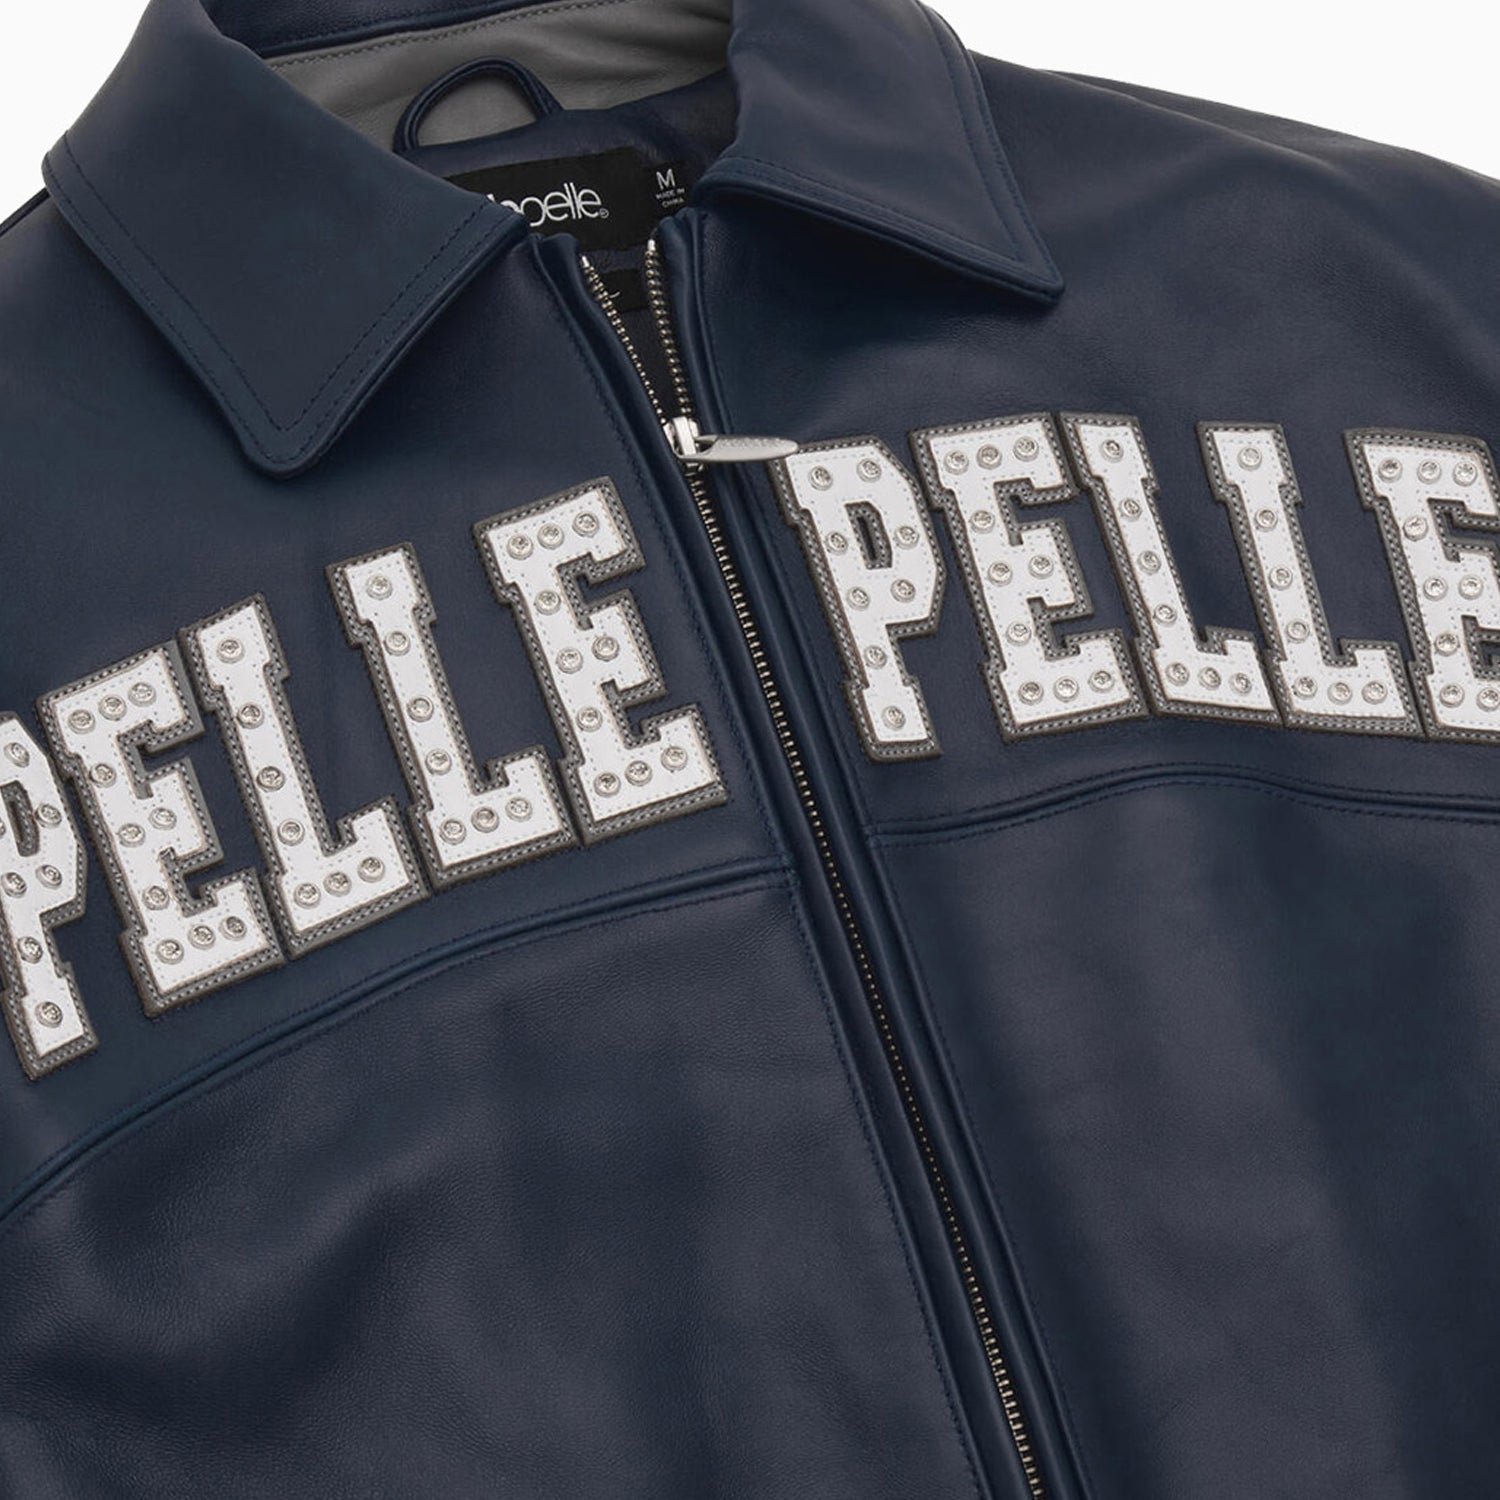 pelle-pelle-mens-arches-leather-jacket-423-37484-ngw